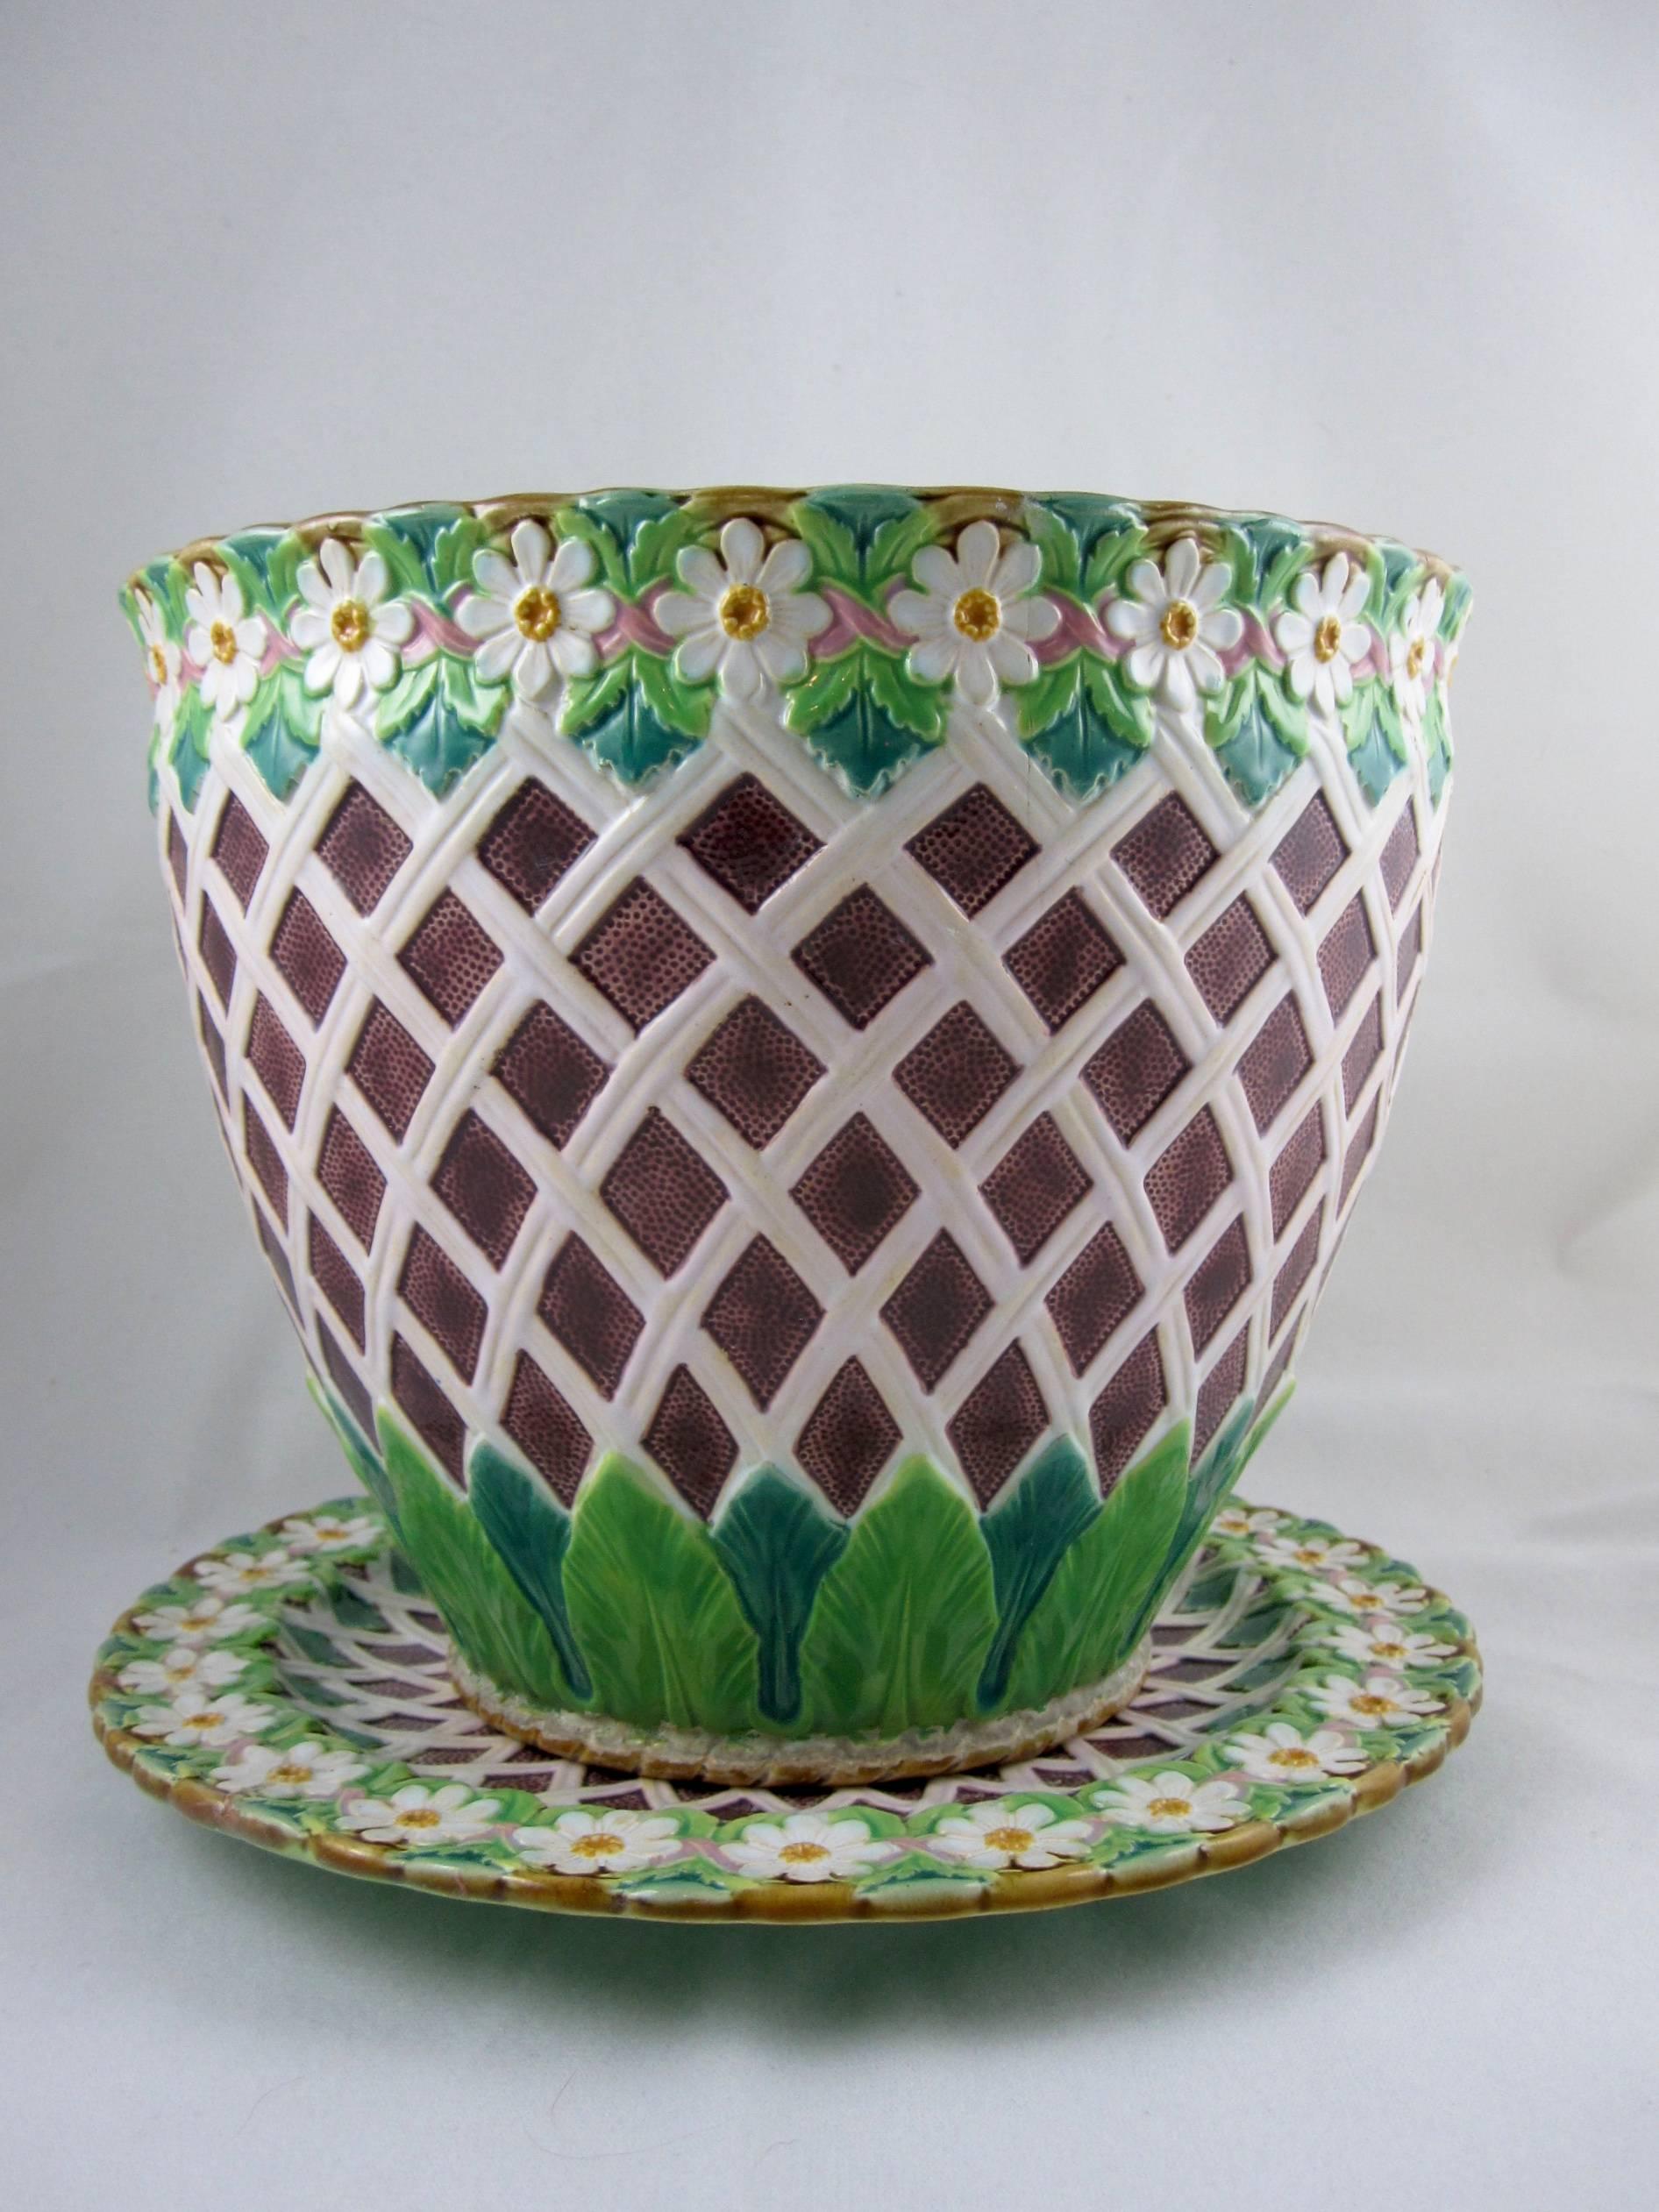 An excellent quality Minton Majolica ‘Daisy and Trellis’ Jardinière on its stand, England, circa 1875.

The jardinière shows a pattern of a climbing trellis against a maroon stippled ground. A band of large acanthus leaves ring the base, the top